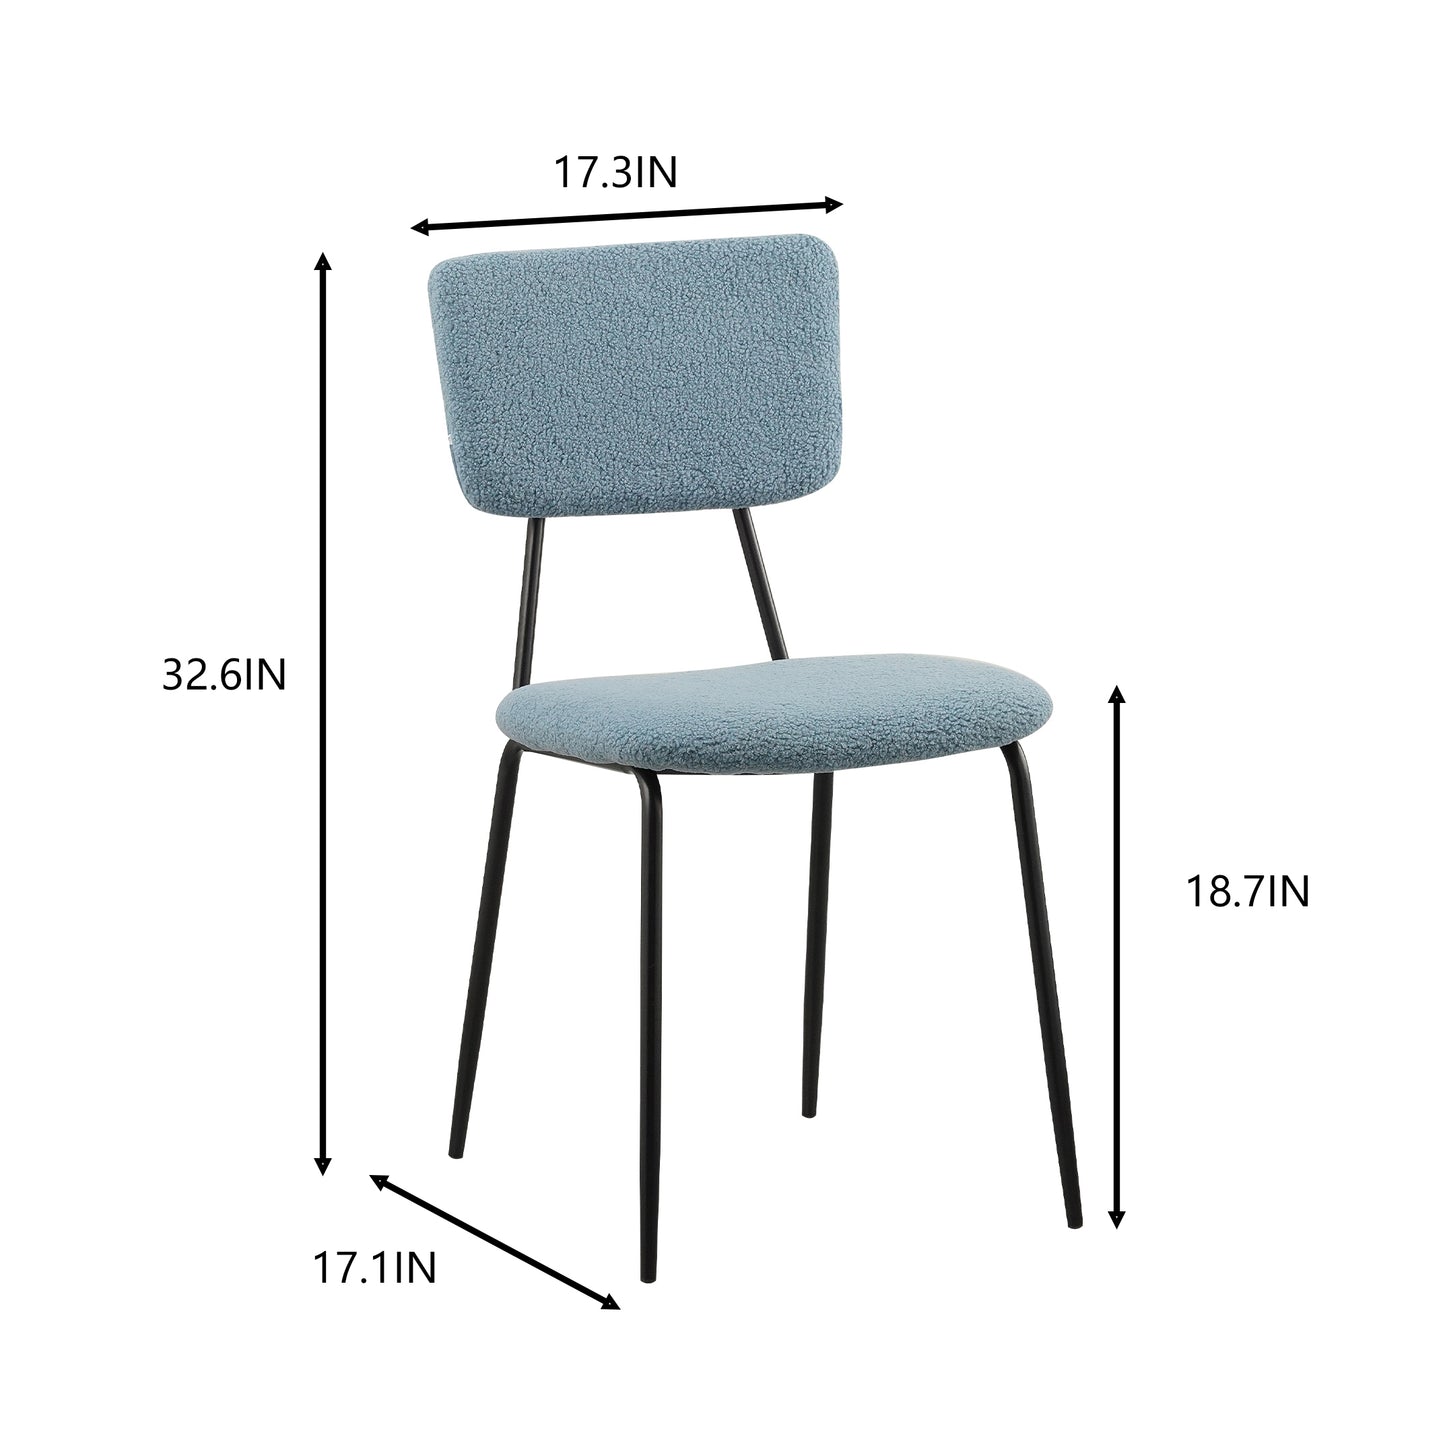 Dining Room Chairs Set of 4, Modern Comfortable Feature Chairs with Faux Plush Upholstered Back and Chrome Legs, Kitchen Side Chairs for Indoor Use: Home, Apartment (4 Blue Chairs)